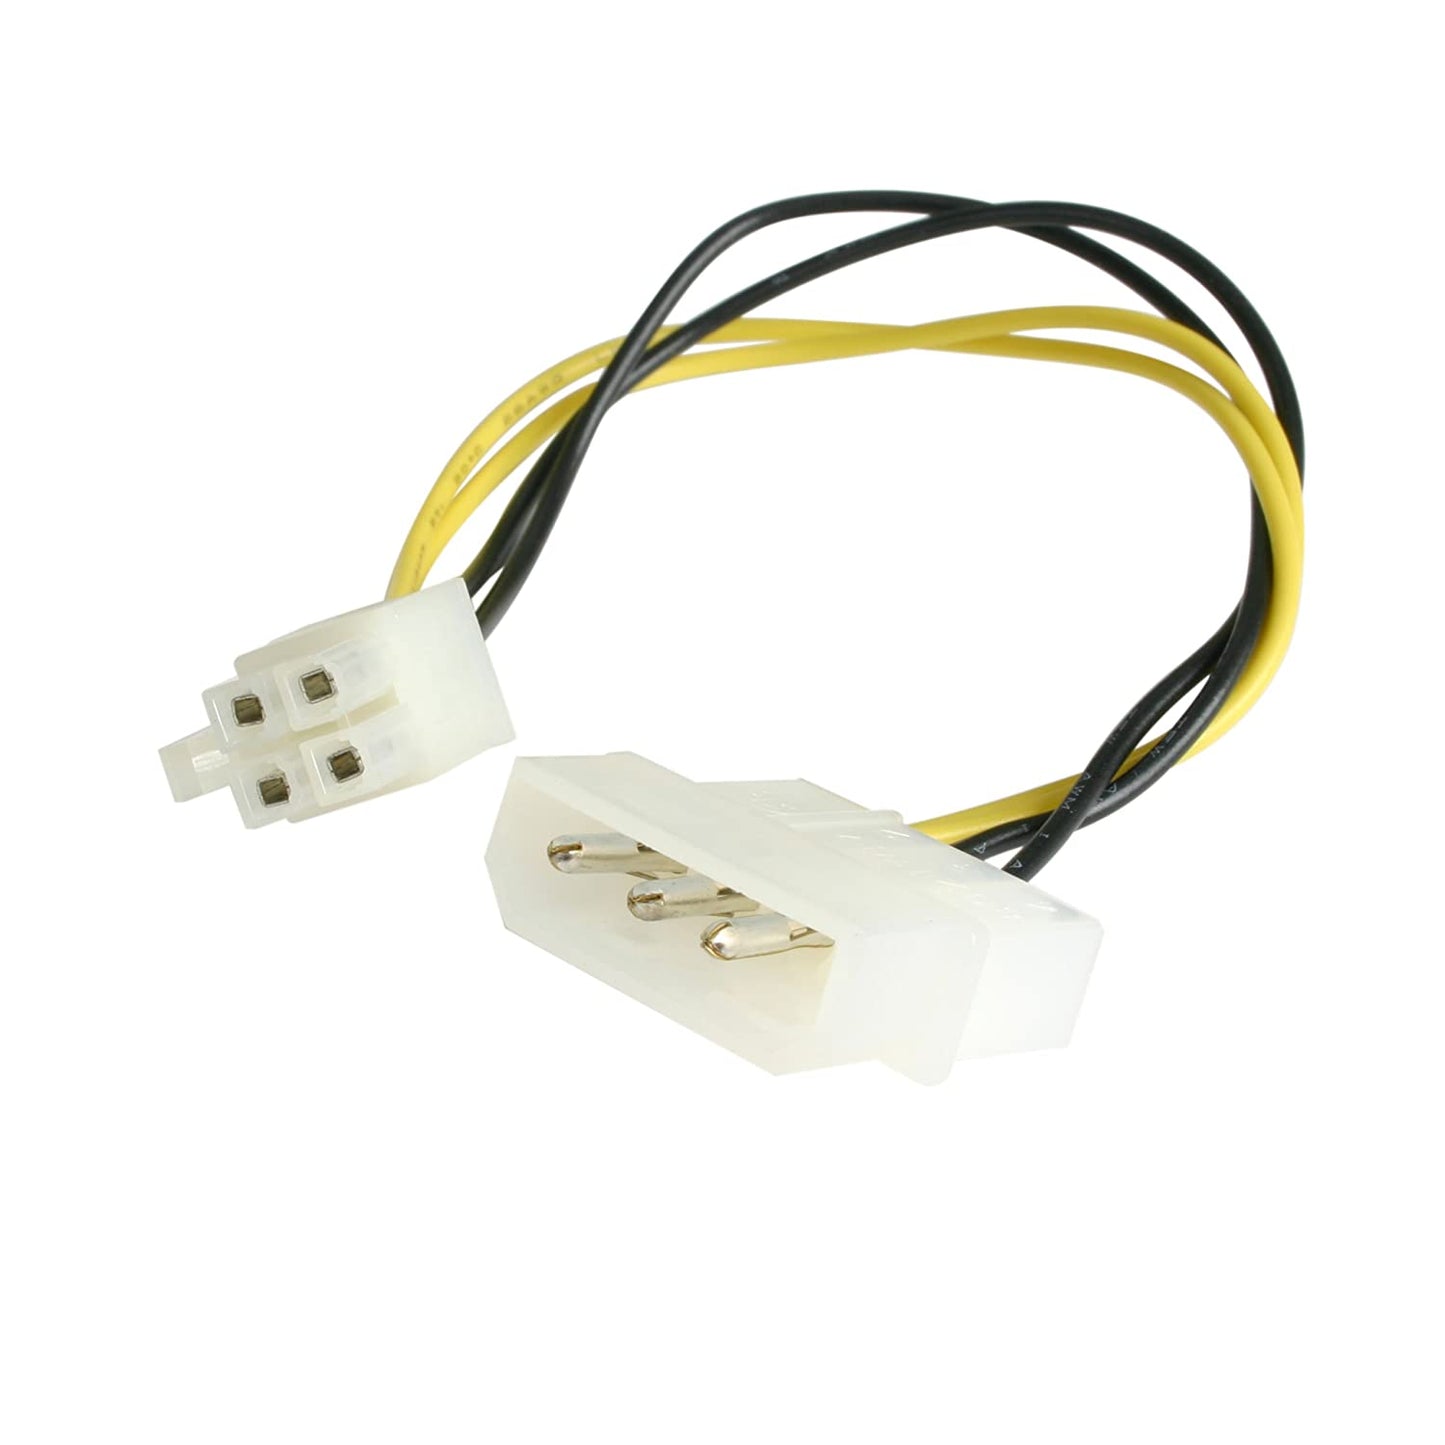 TRANSITION NETWORKS KIT POWER CABLE